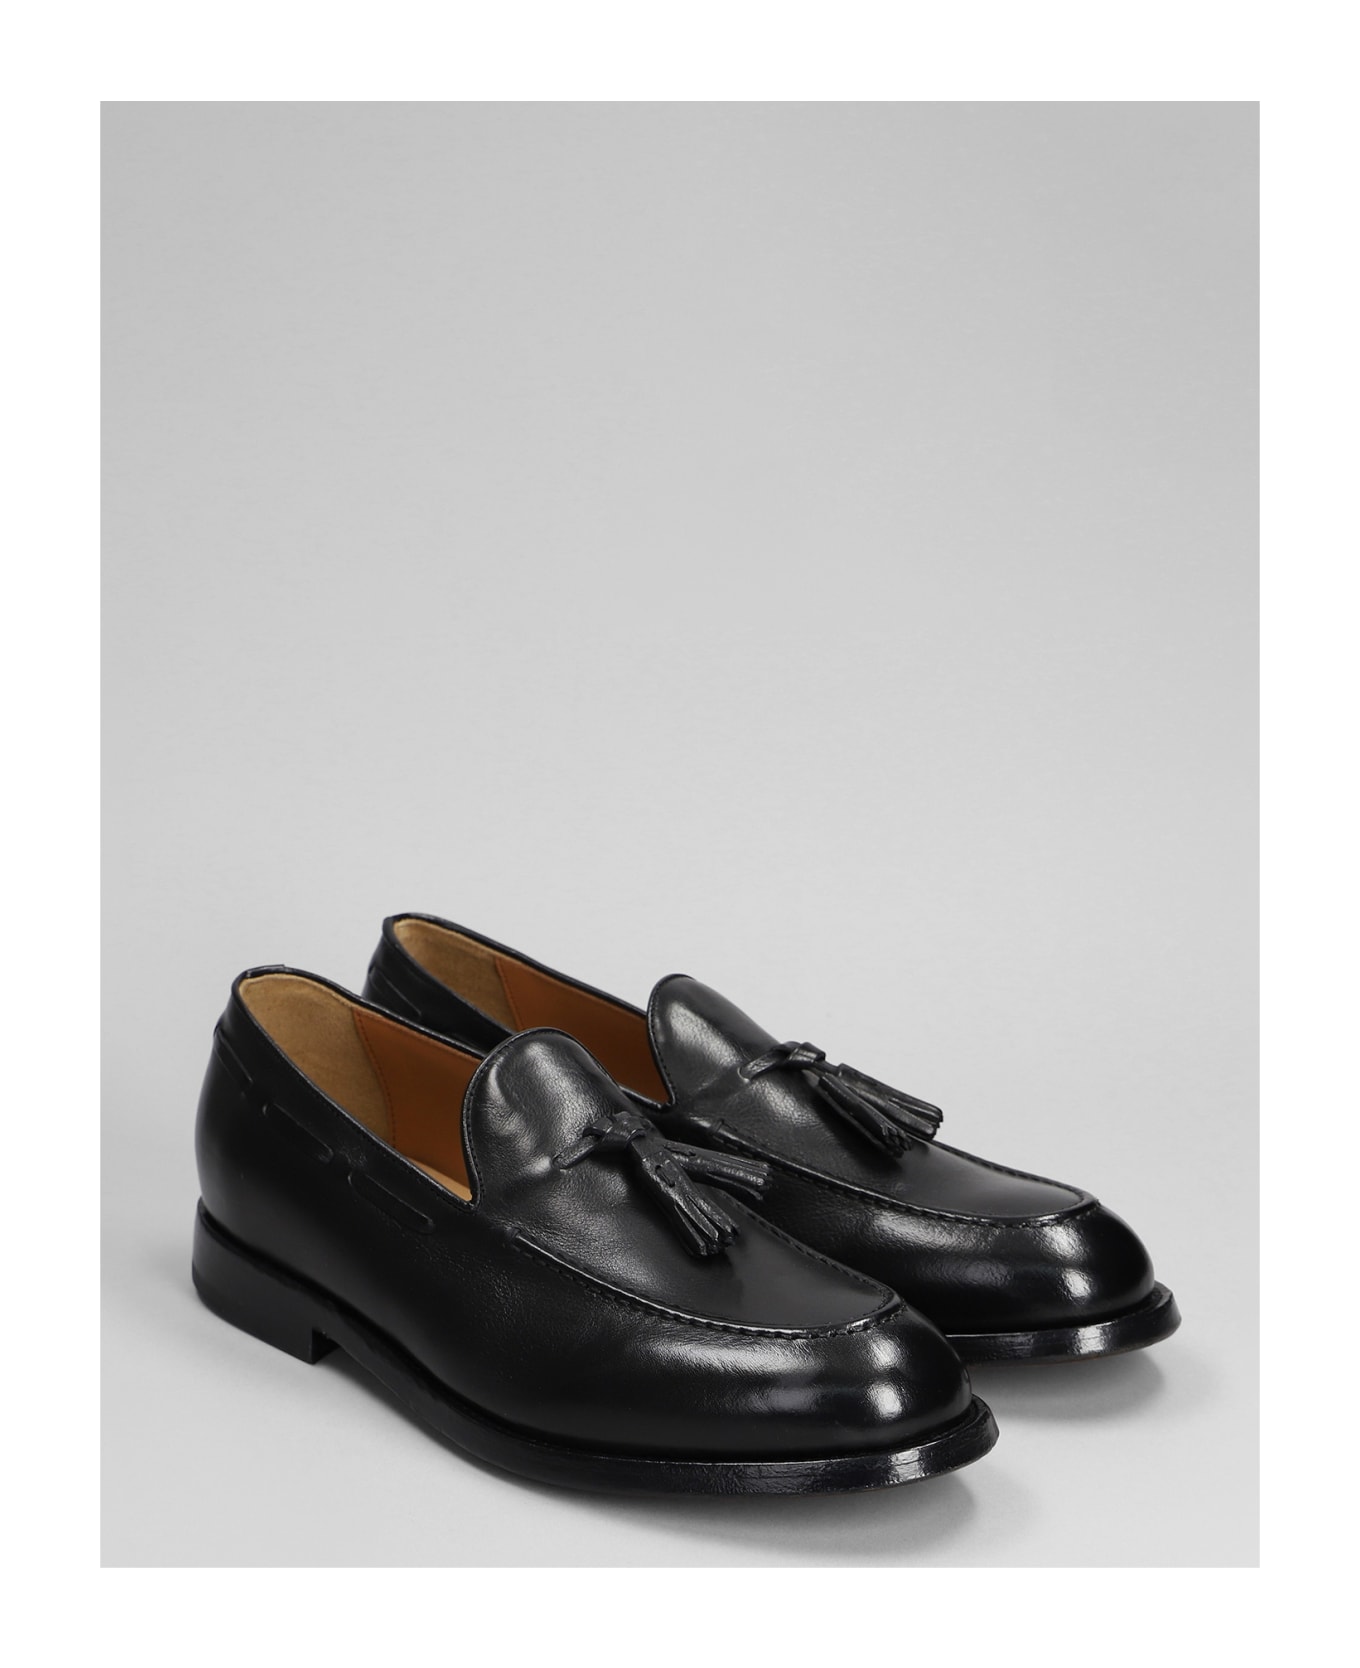 Green George Loafers In Black Leather - black ローファー＆デッキシューズ